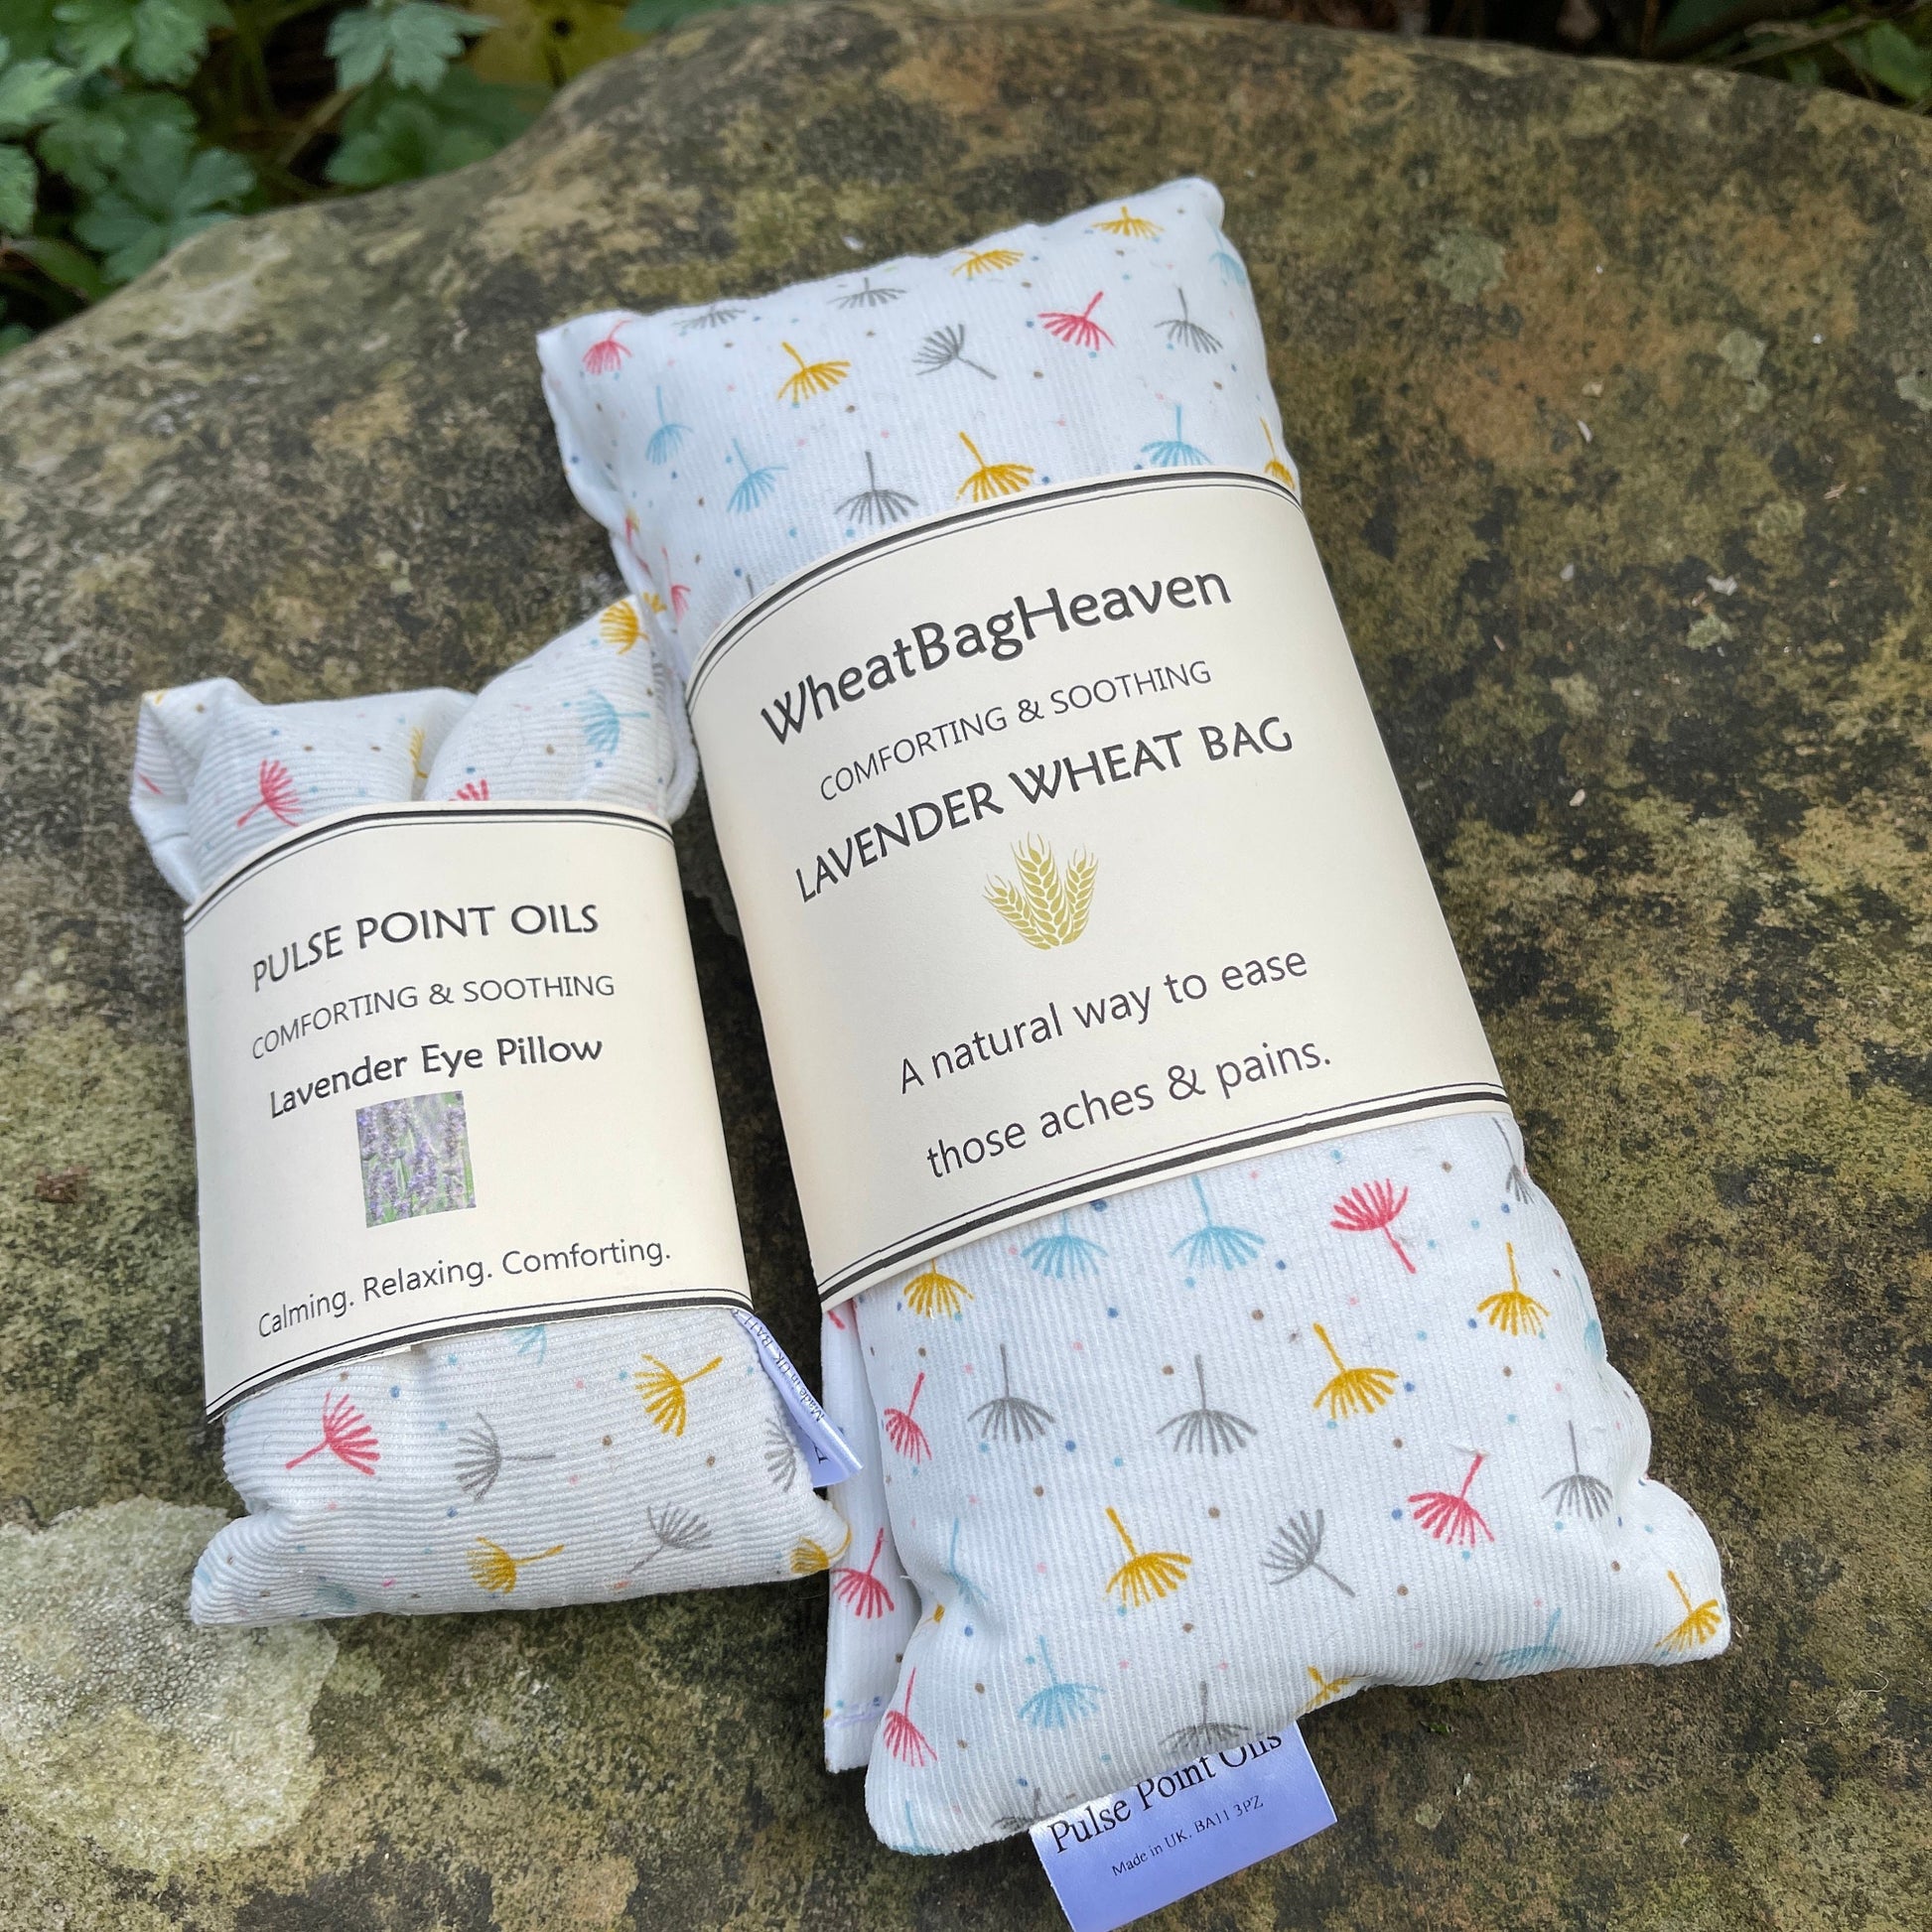 Light blue printed long cotton wheat bags and eye pillows with lavender.